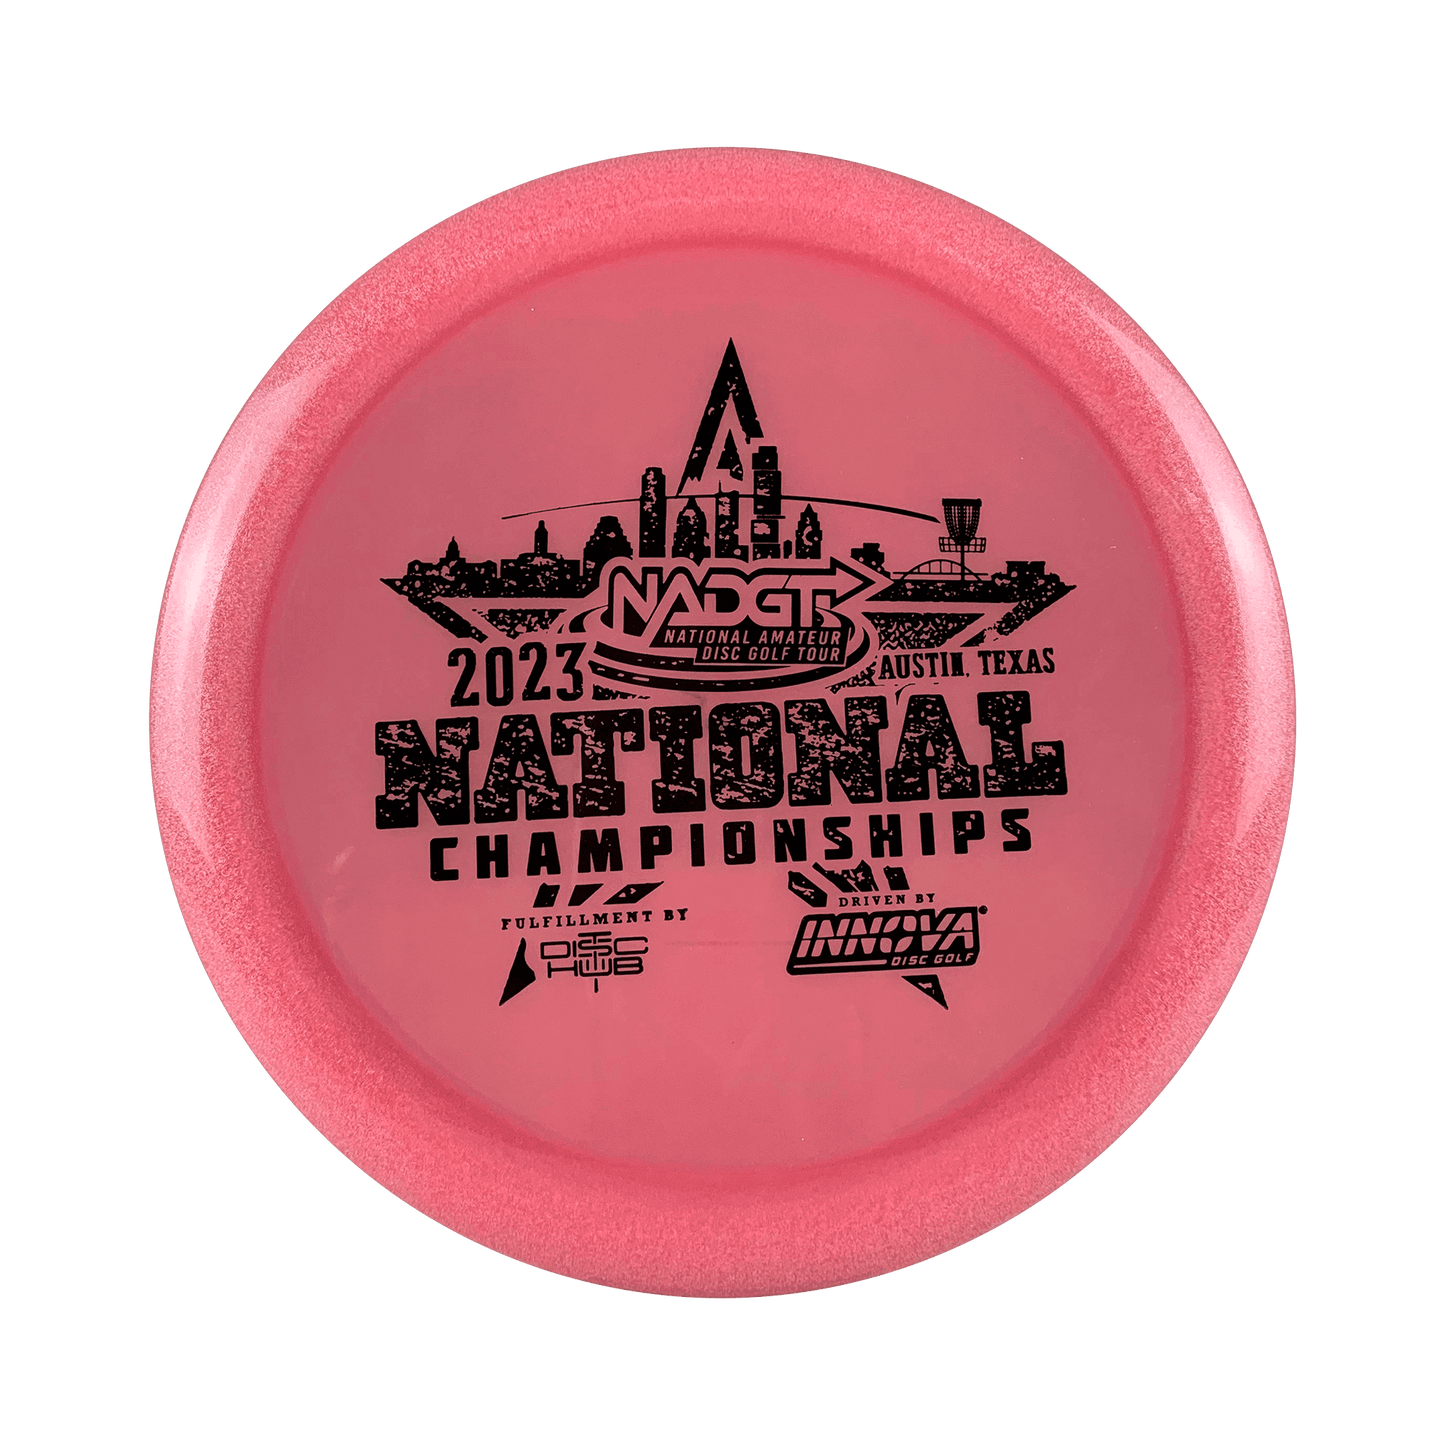 Color Glow Champion Wraith - NADGT National Championship 2023 Disc Innova red glow 165 